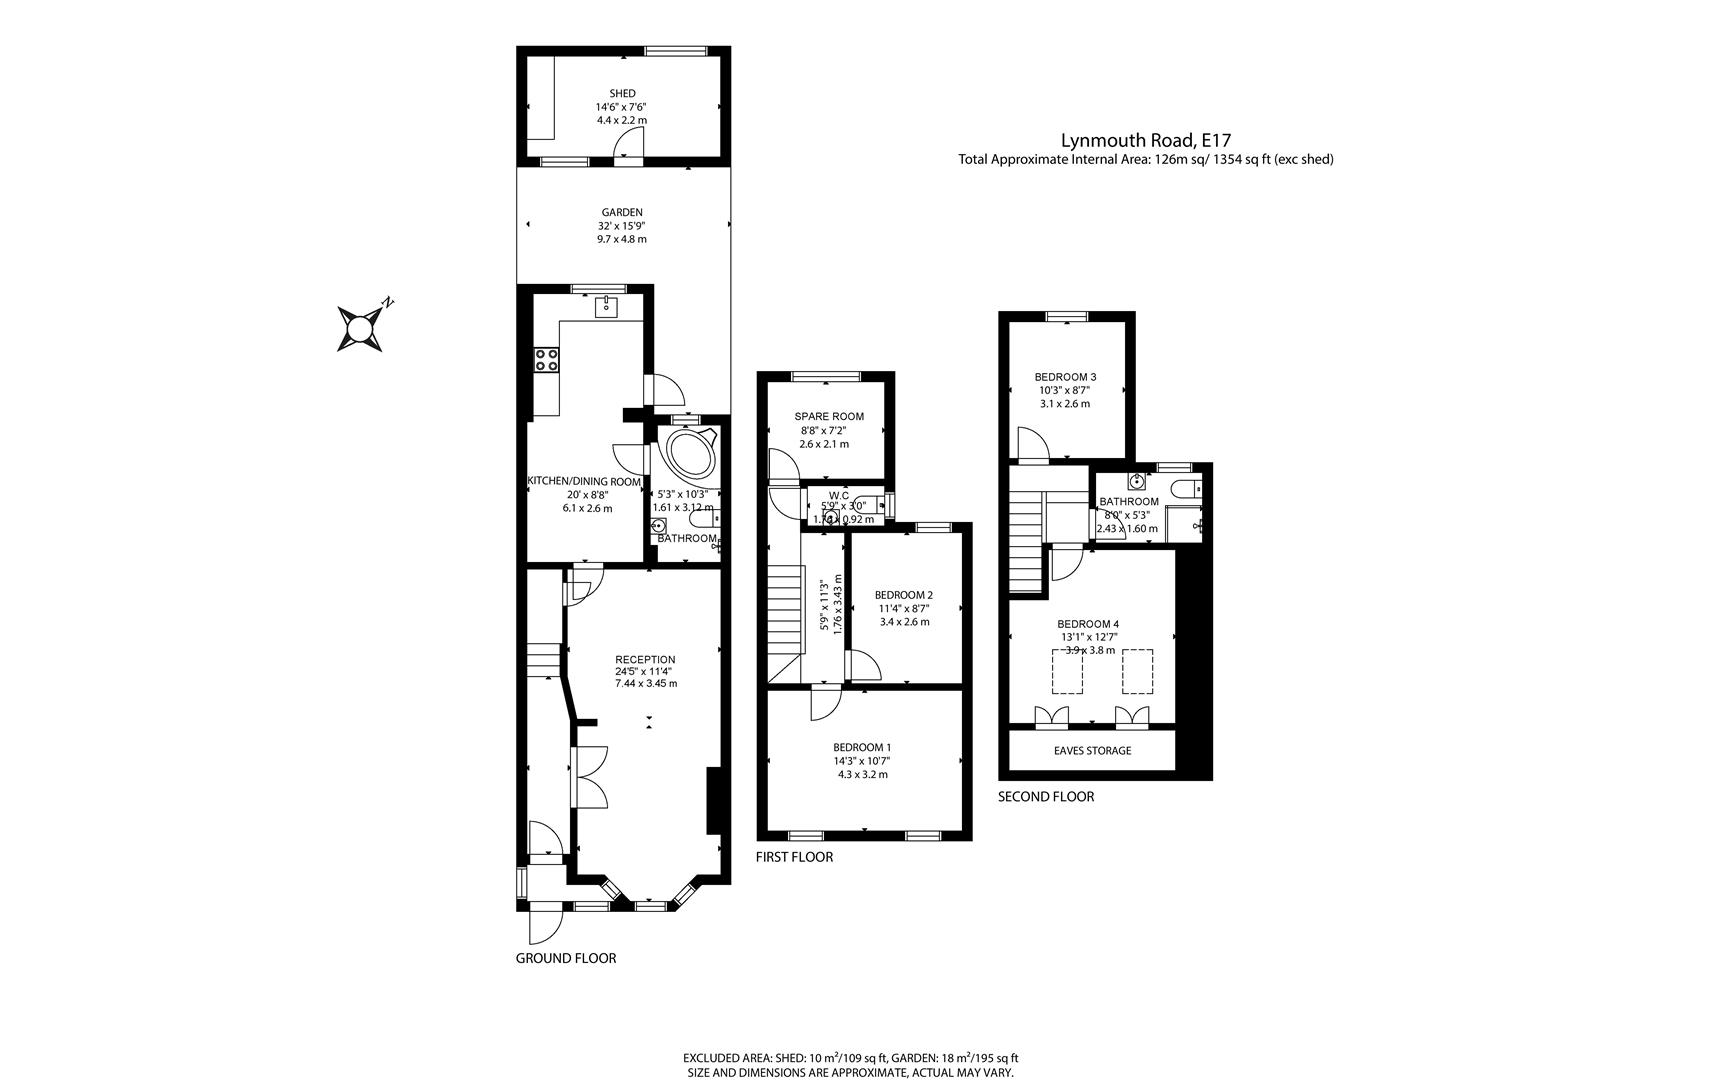 4 bed terraced house for sale in Lynmouth Road, Walthamstow - Property floorplan